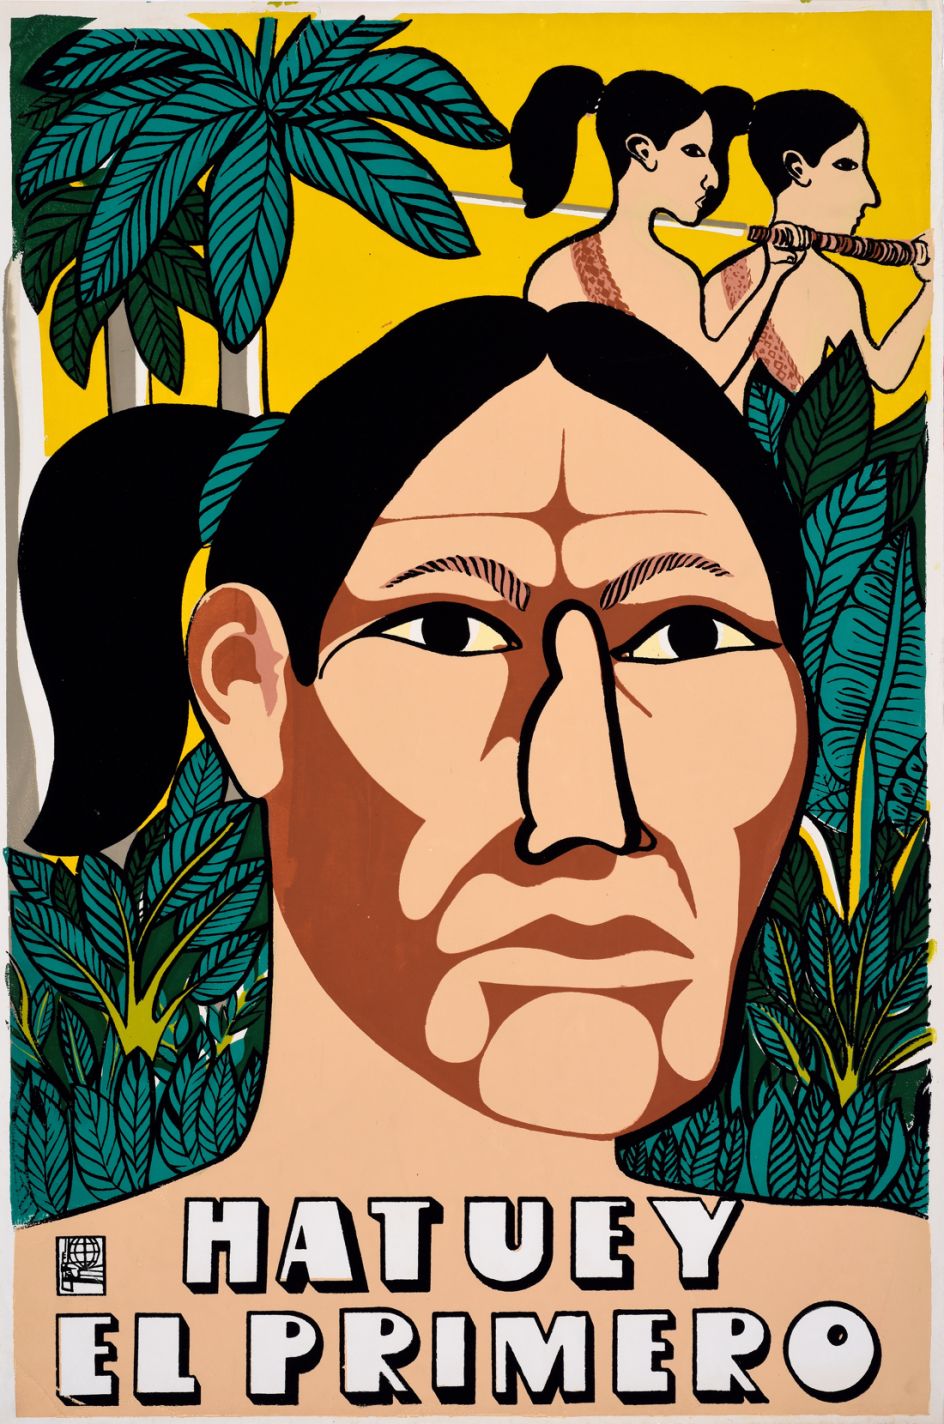 Gladys Acosta Ávila, 1992, Screenprint, OSPAAAL, The Mike Stanfield Collection